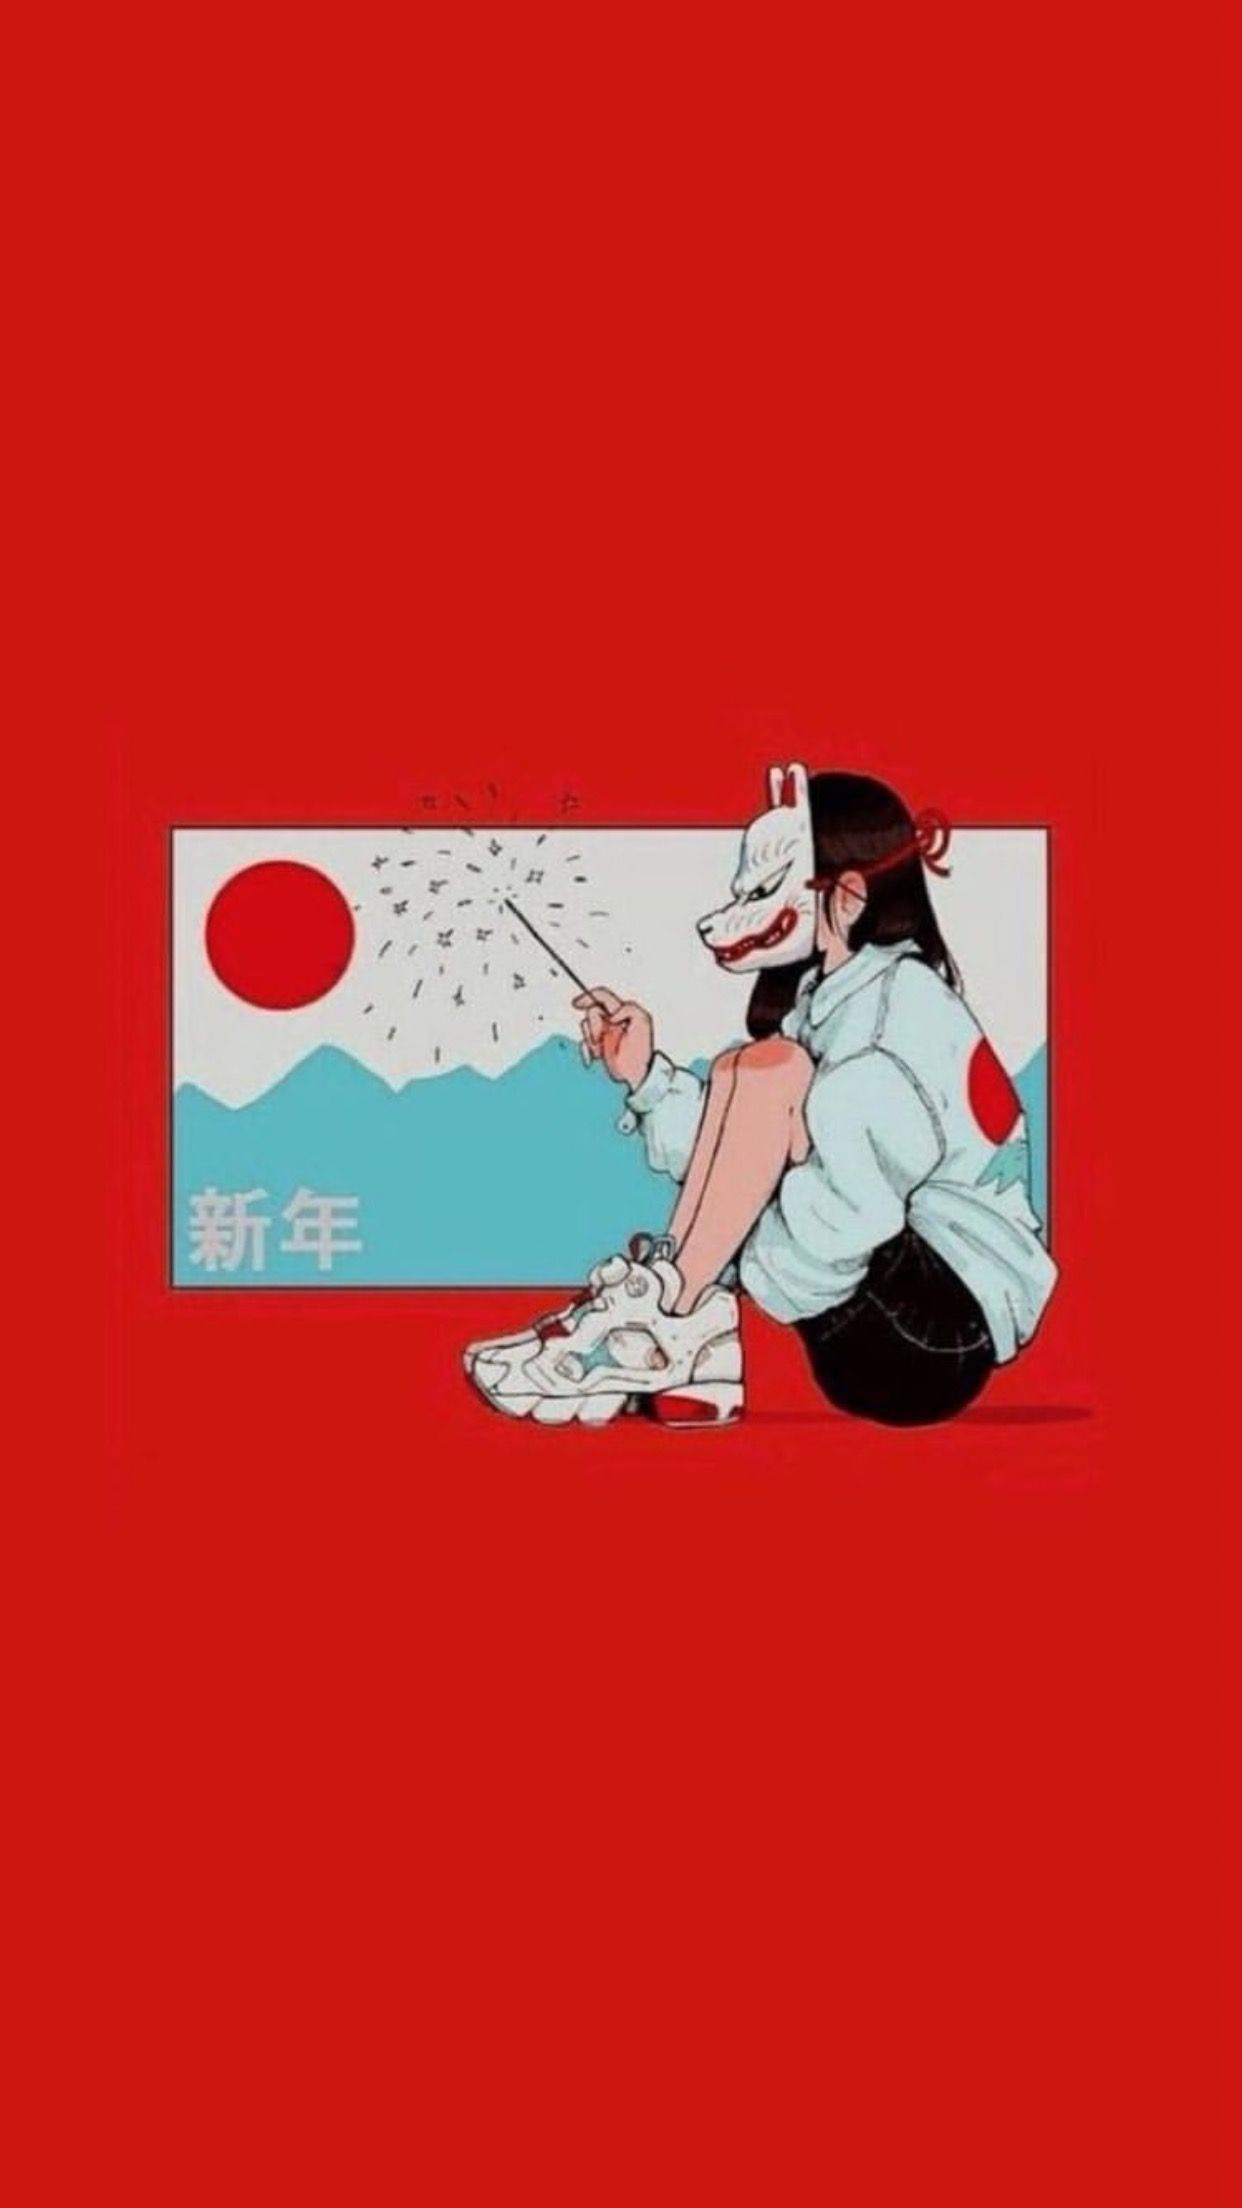 Aesthetic Anime Wallpapers Red